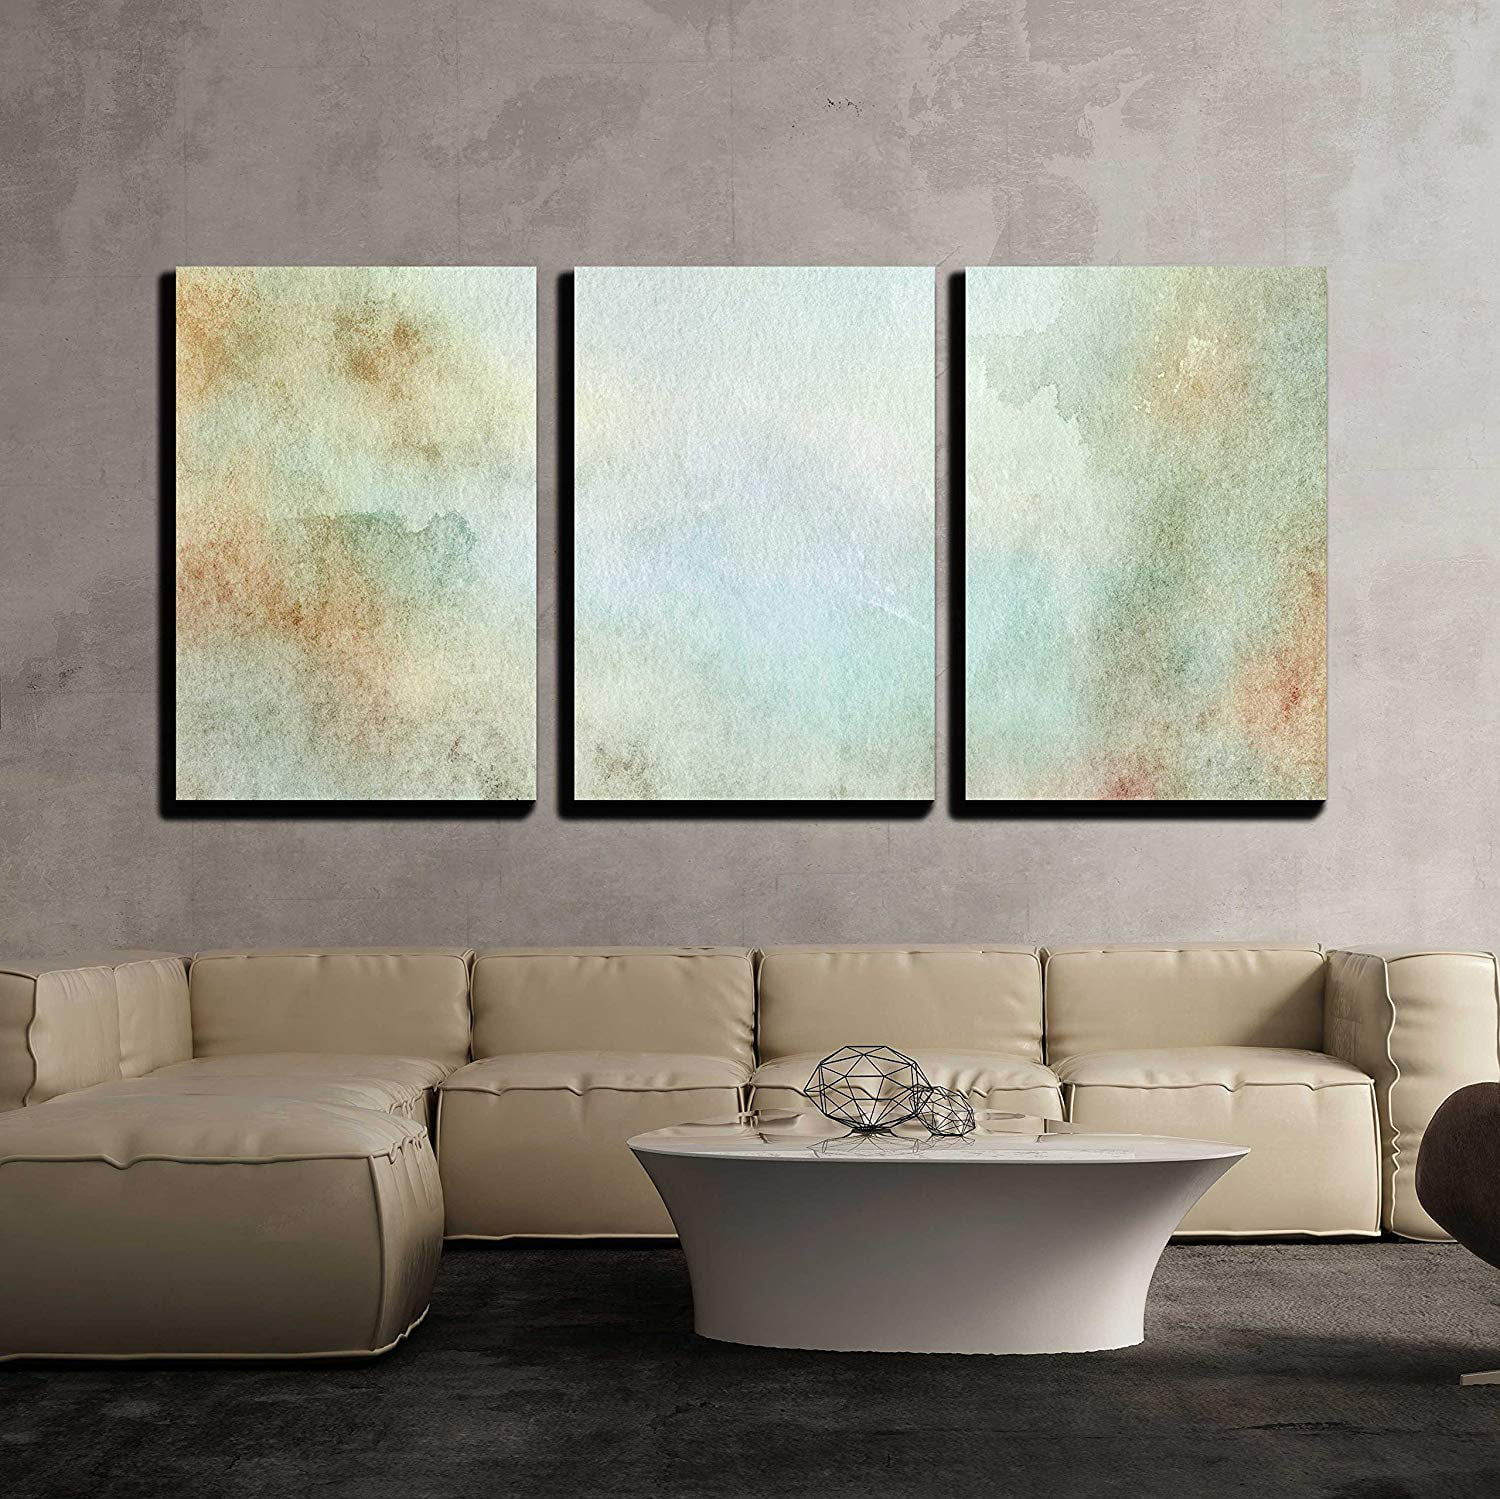 wall26 - 3 Piece Canvas Wall Art - Abstract Light Blue and Beige ...